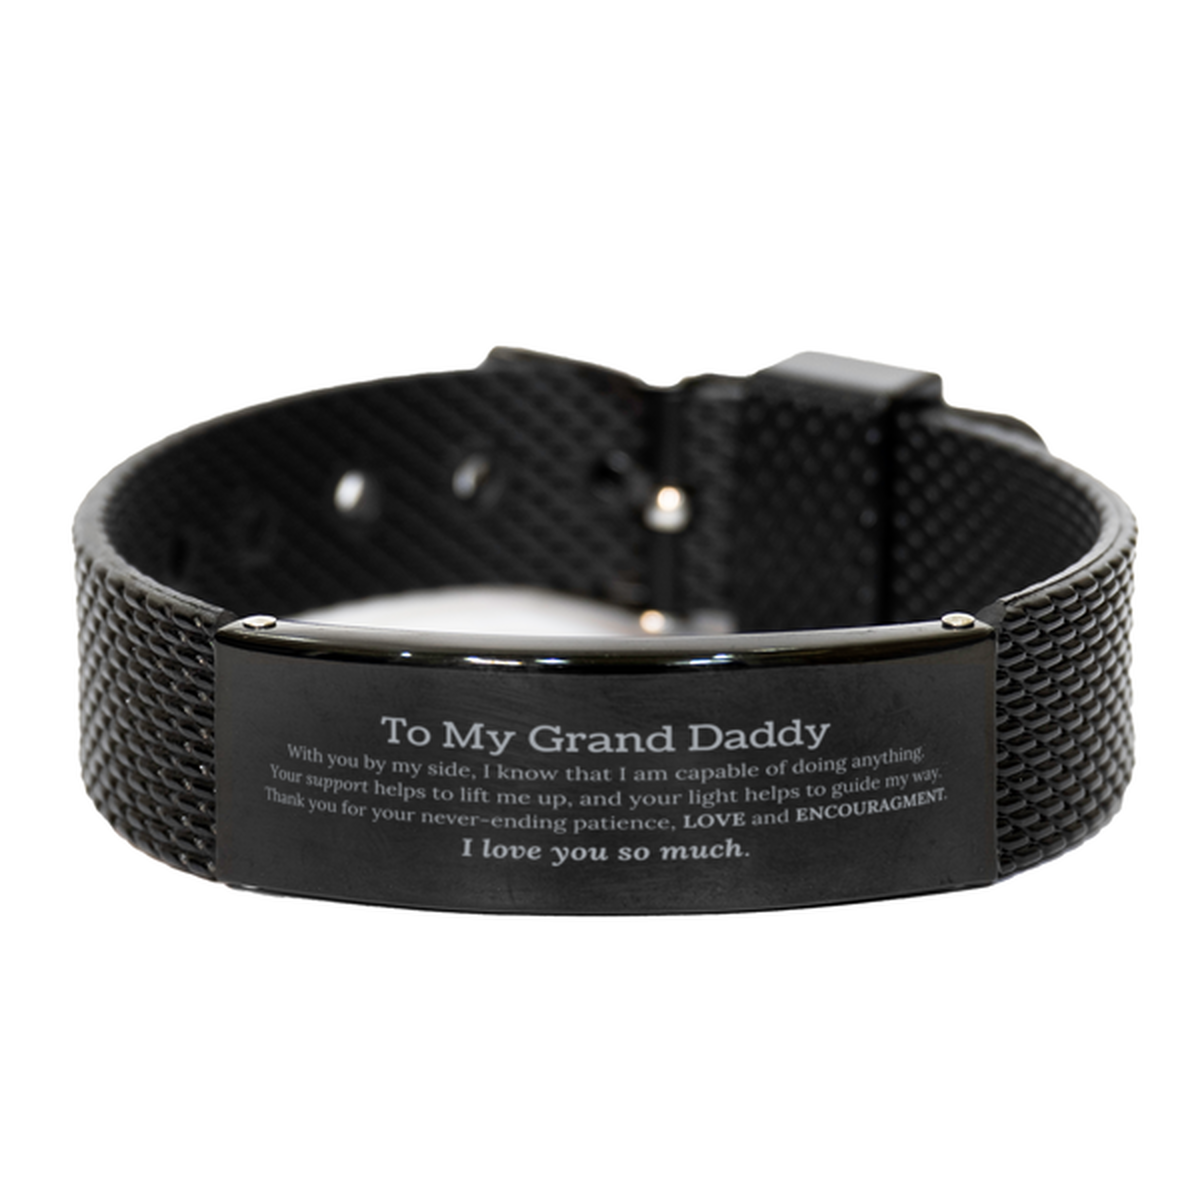 Appreciation Grand Daddy Black Shark Mesh Bracelet Gifts, To My Grand Daddy Birthday Christmas Wedding Keepsake Gifts for Grand Daddy With you by my side, I know that I am capable of doing anything. I love you so much